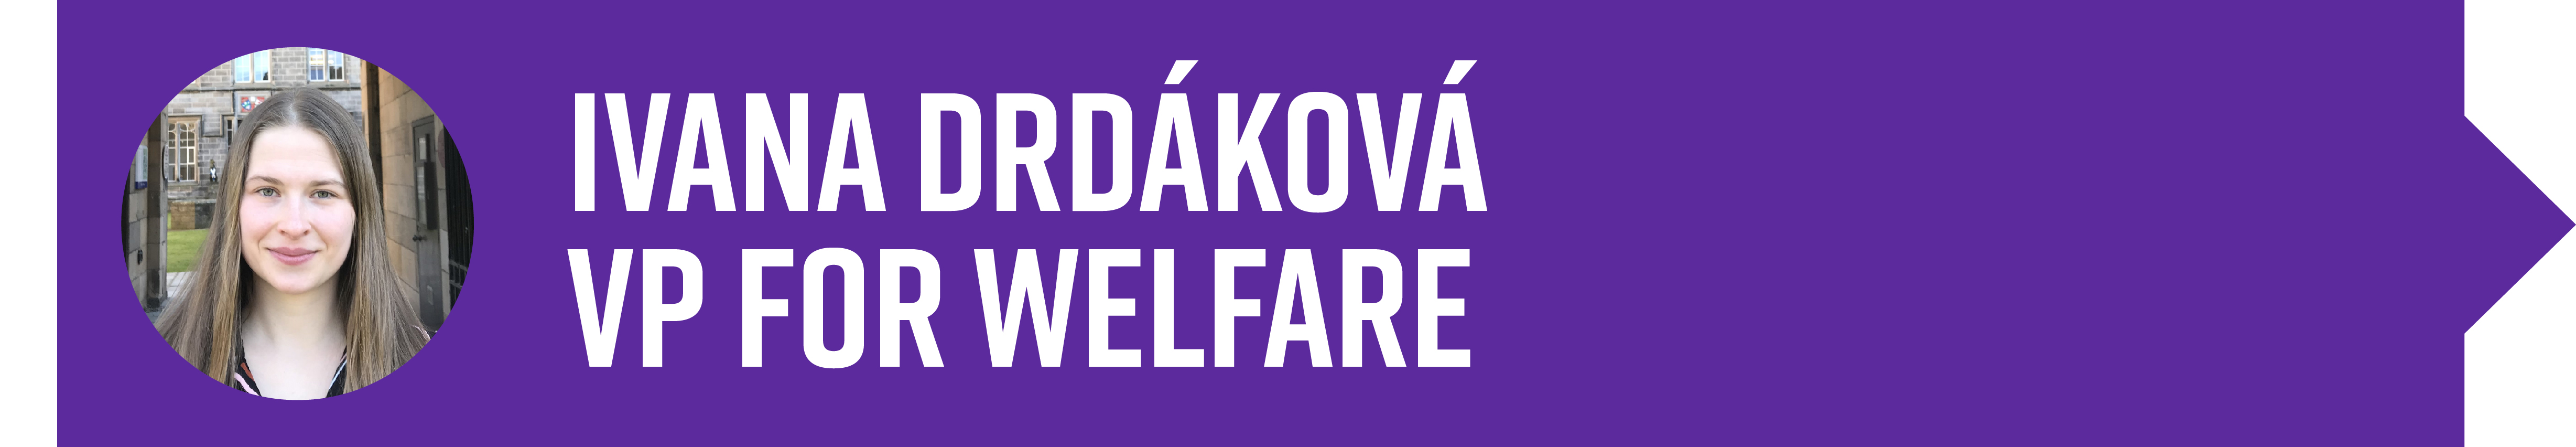 Image contains a photo, name and title for Ivana Drdáková, Vice President for Welfare